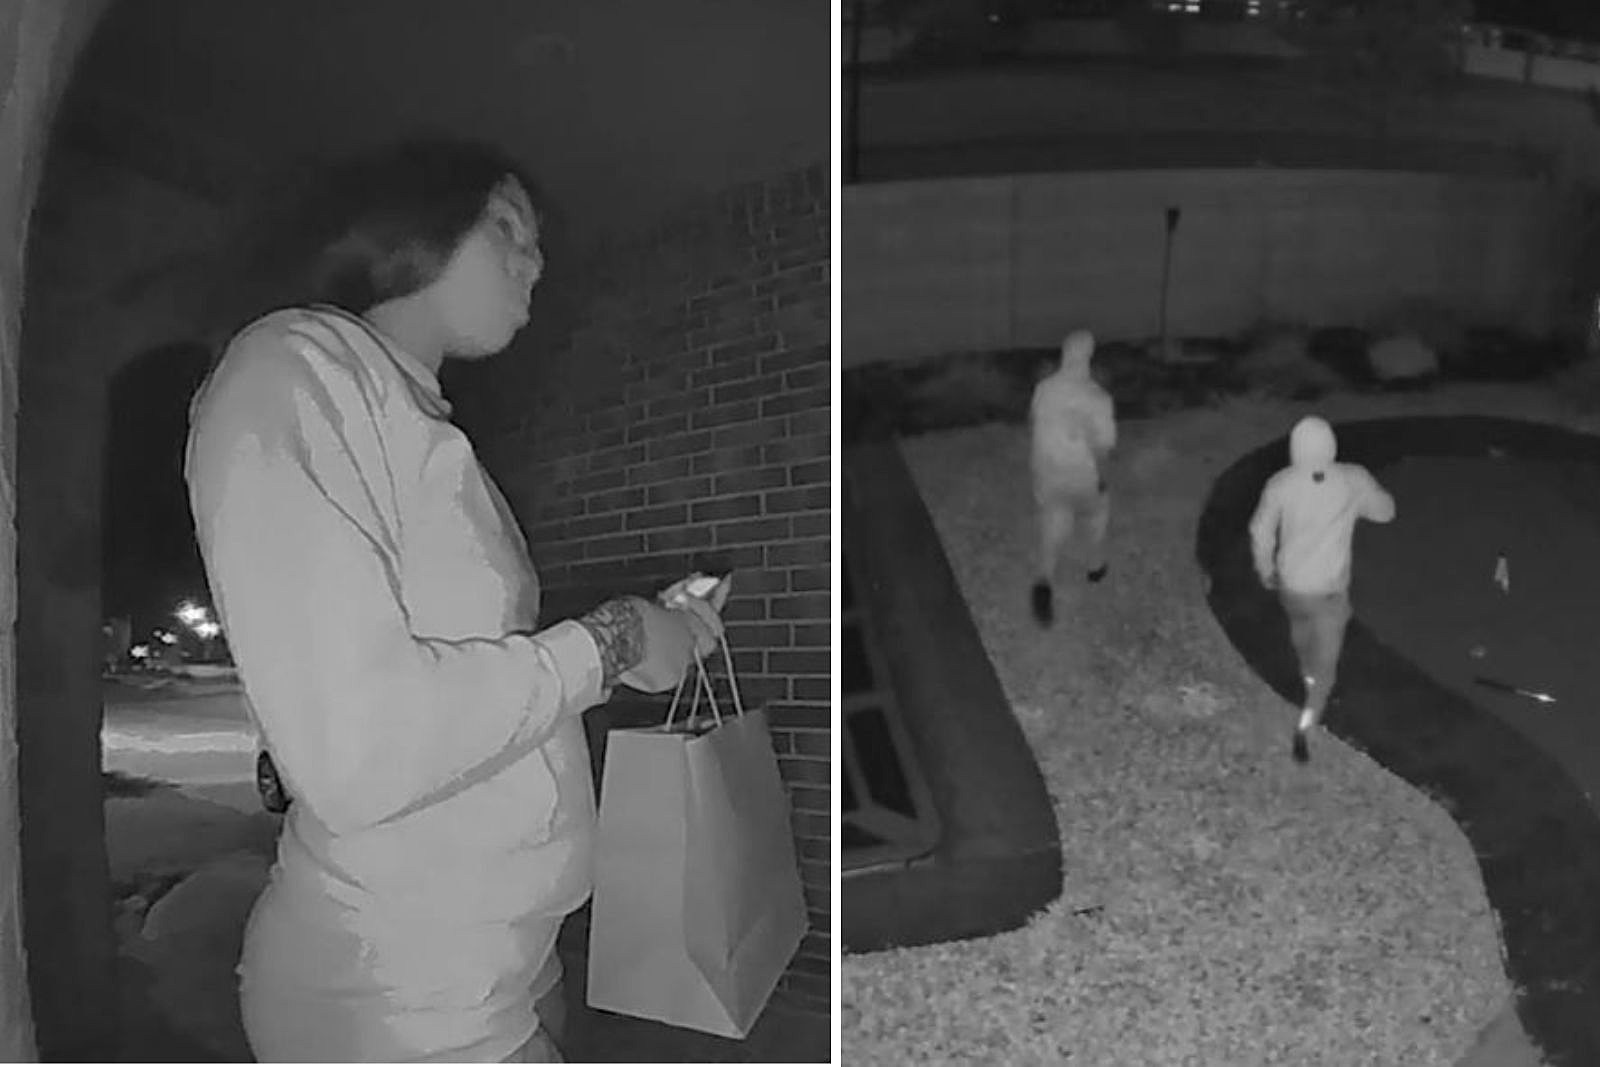 TX Woman Pretends to Be Door Dasher, 4 Cohorts Try and Break in